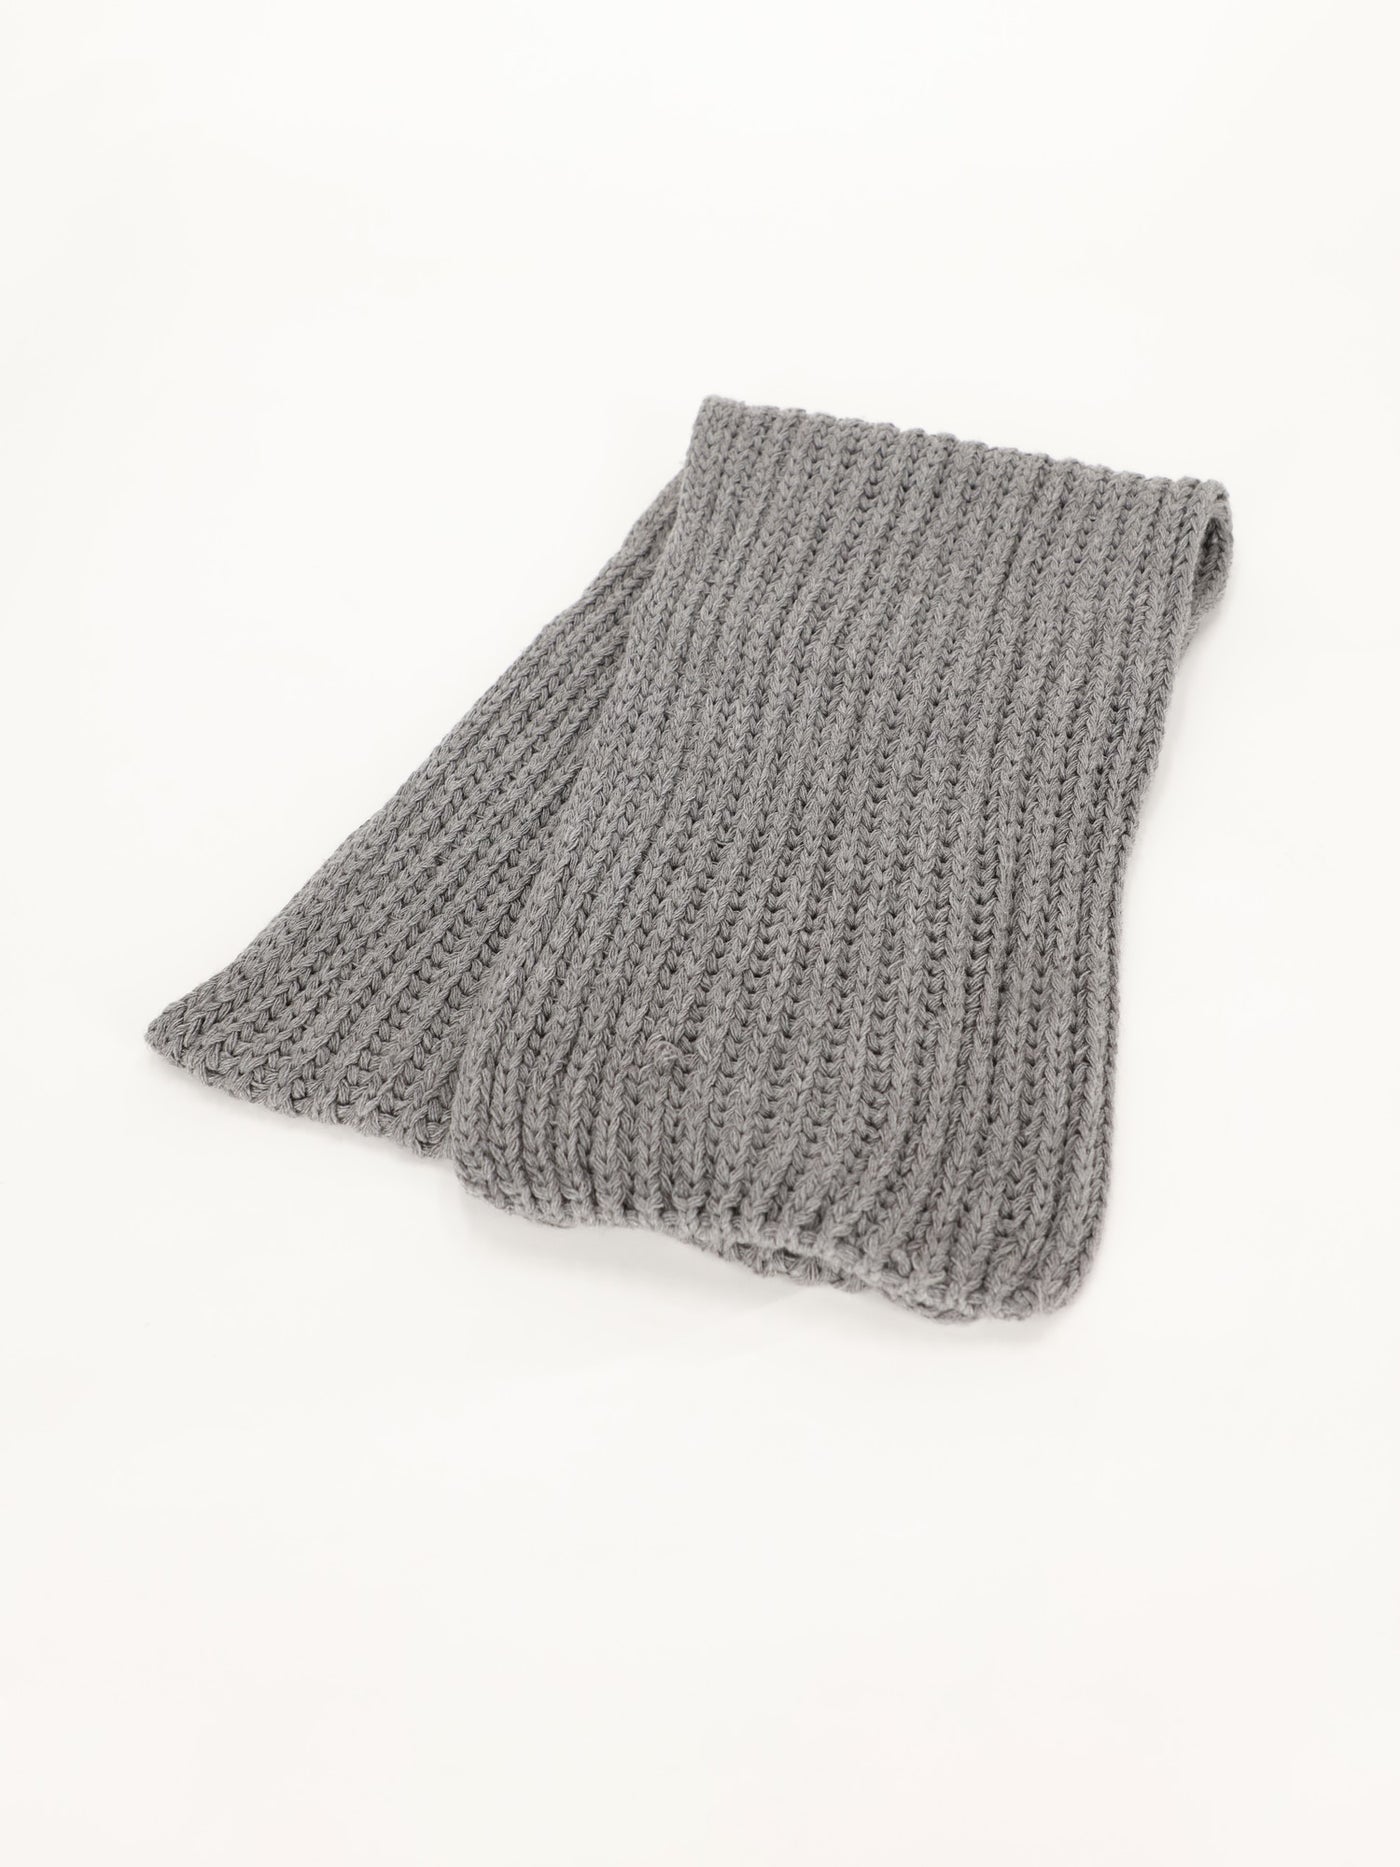 Basic Knitted Wool Scarf